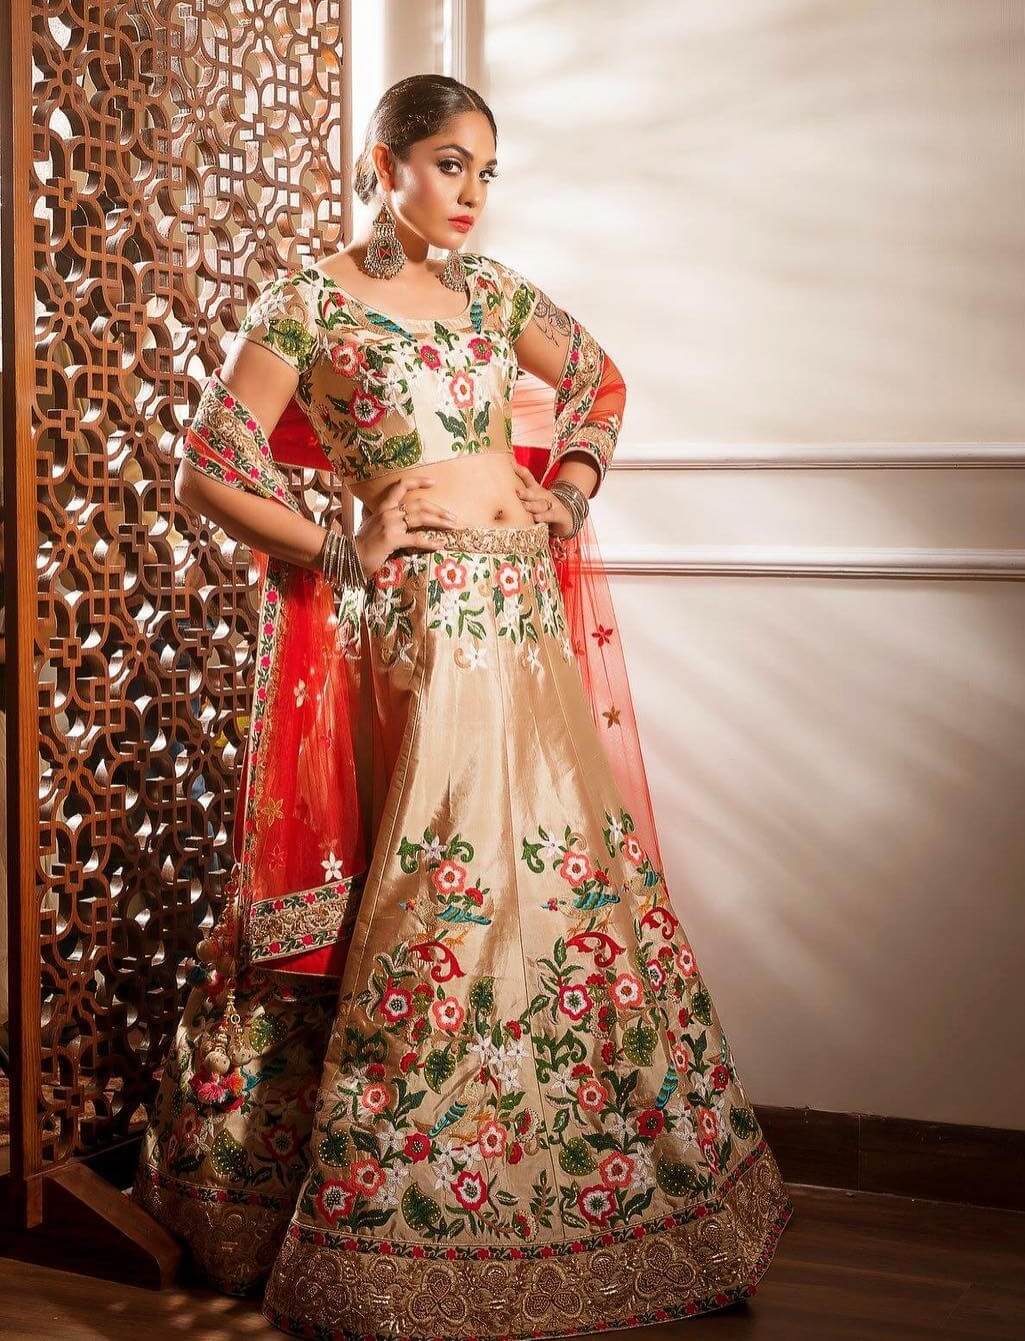 Mumtaz Sorcar In Golden Silk Embroidered Lehenga With Red Dupatta